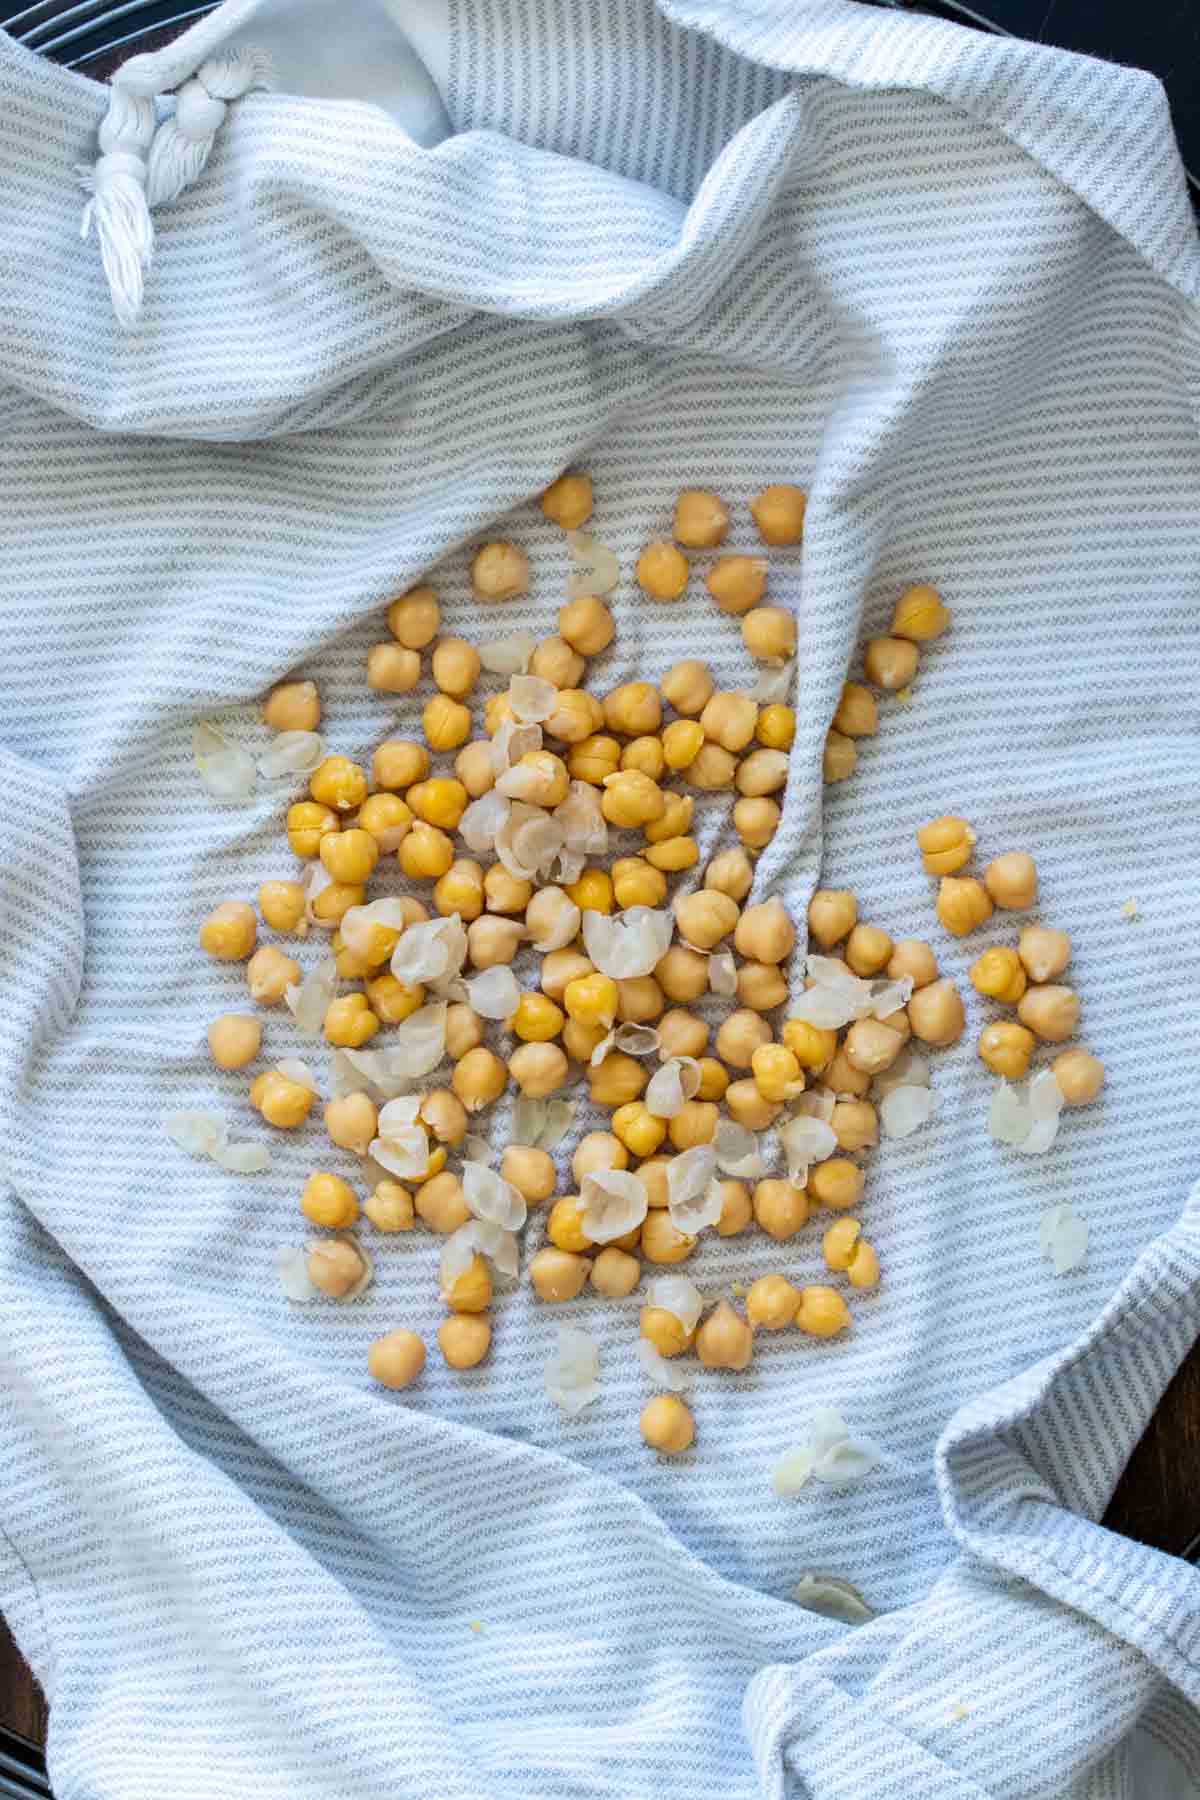 Cooked chickpeas with skins half off on a white kitchen towel.